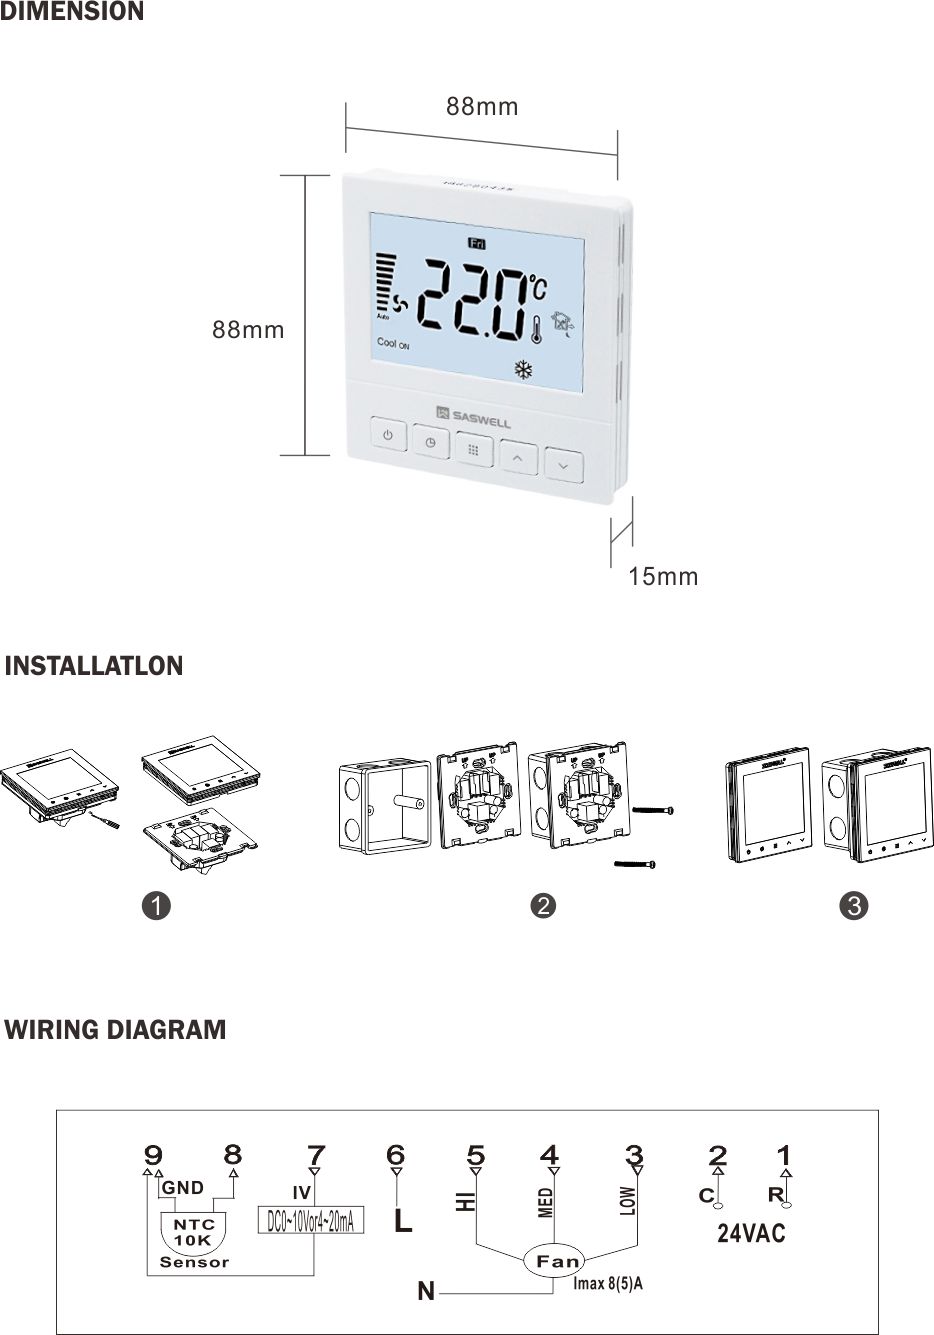 Programmable thermostats for home